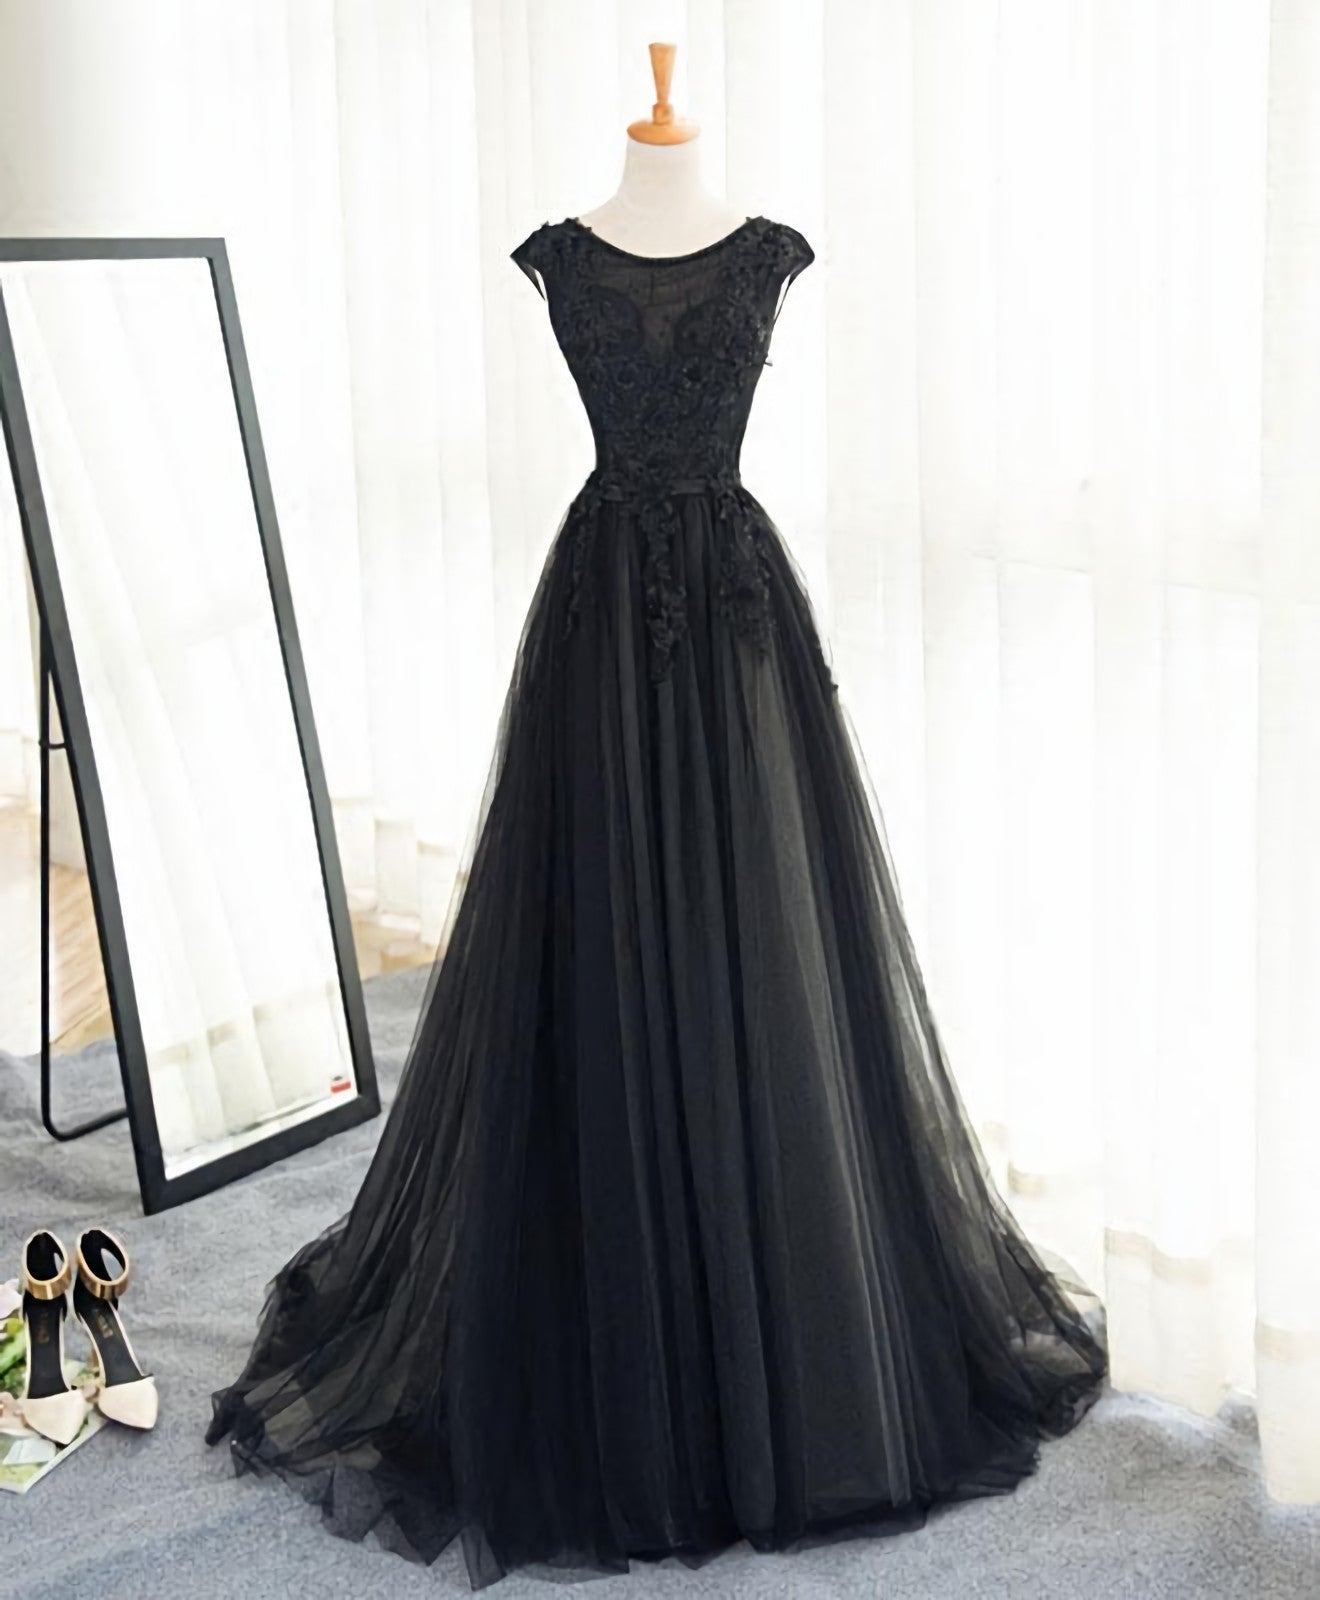 Black A Line Tulle Lace Long Corset Prom Dress, Evening Dress outfit, Homecoming Dress Sweetheart